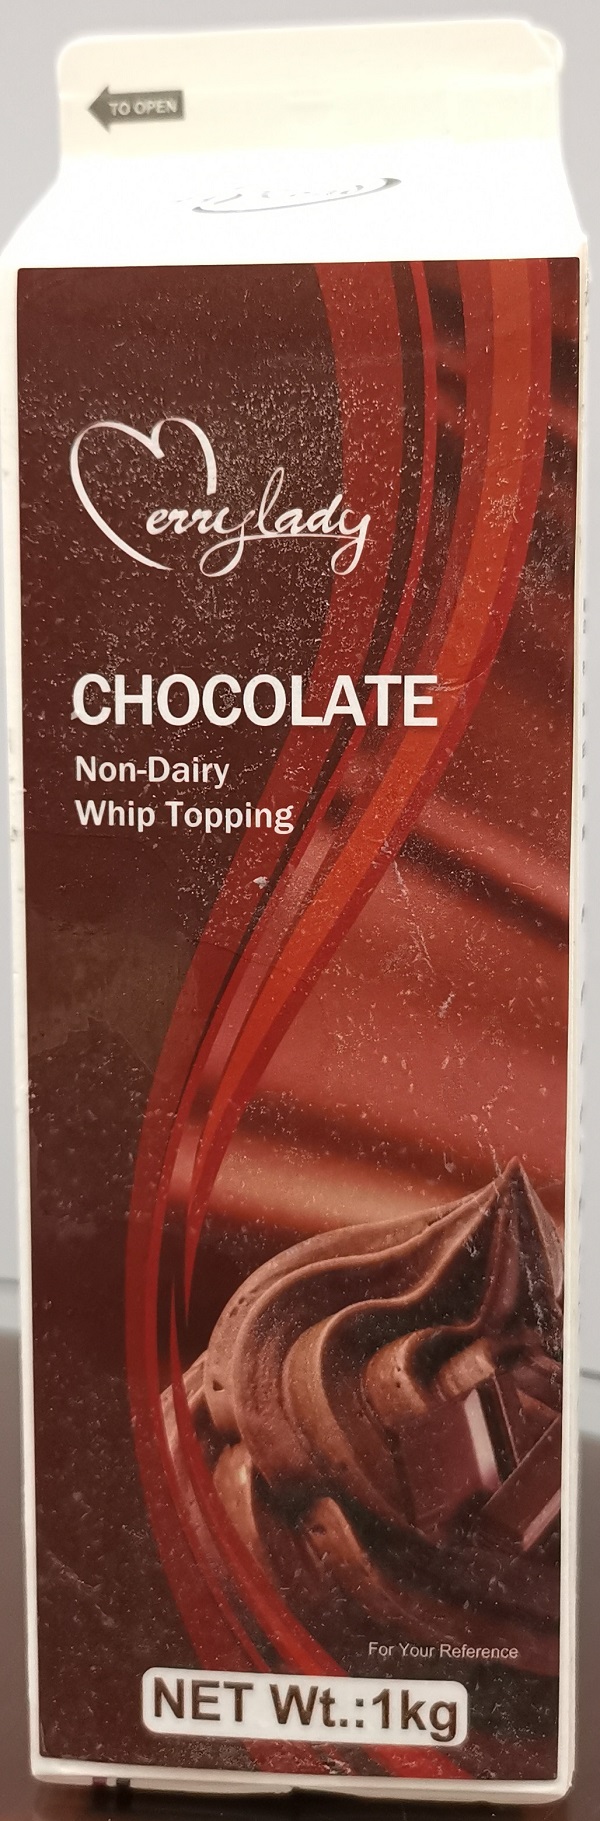 Merrylady – « Chocolate Non-Dairy Whip Topping » – 1 kg (recto)